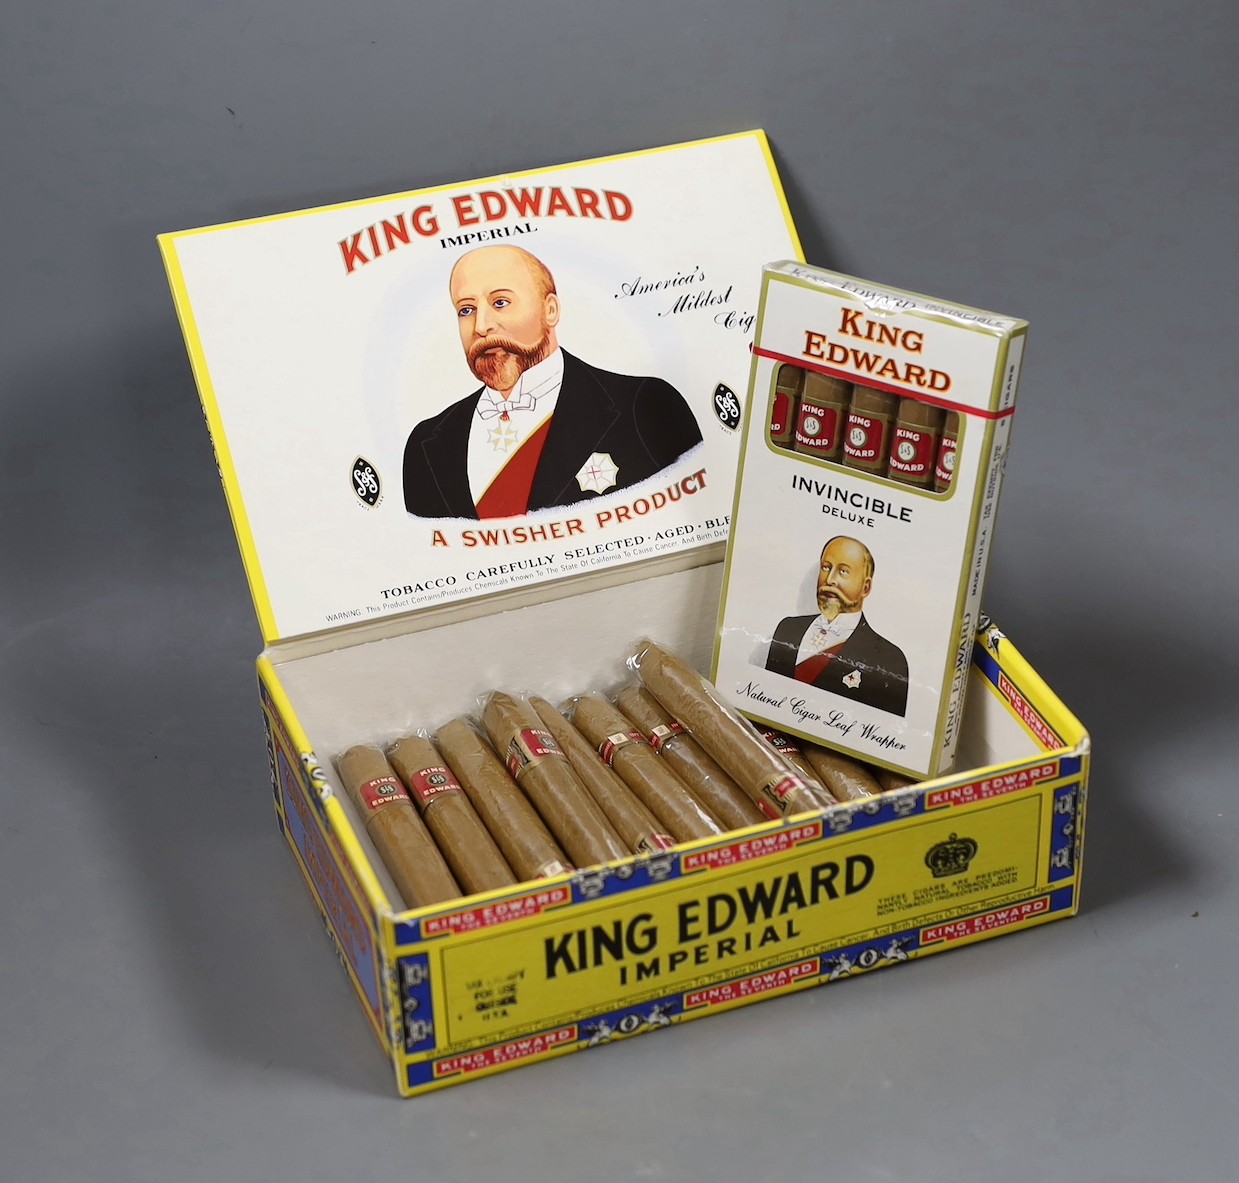 A group of 50 King Edward the Seventh Imperial Mild Tobaccos cigars